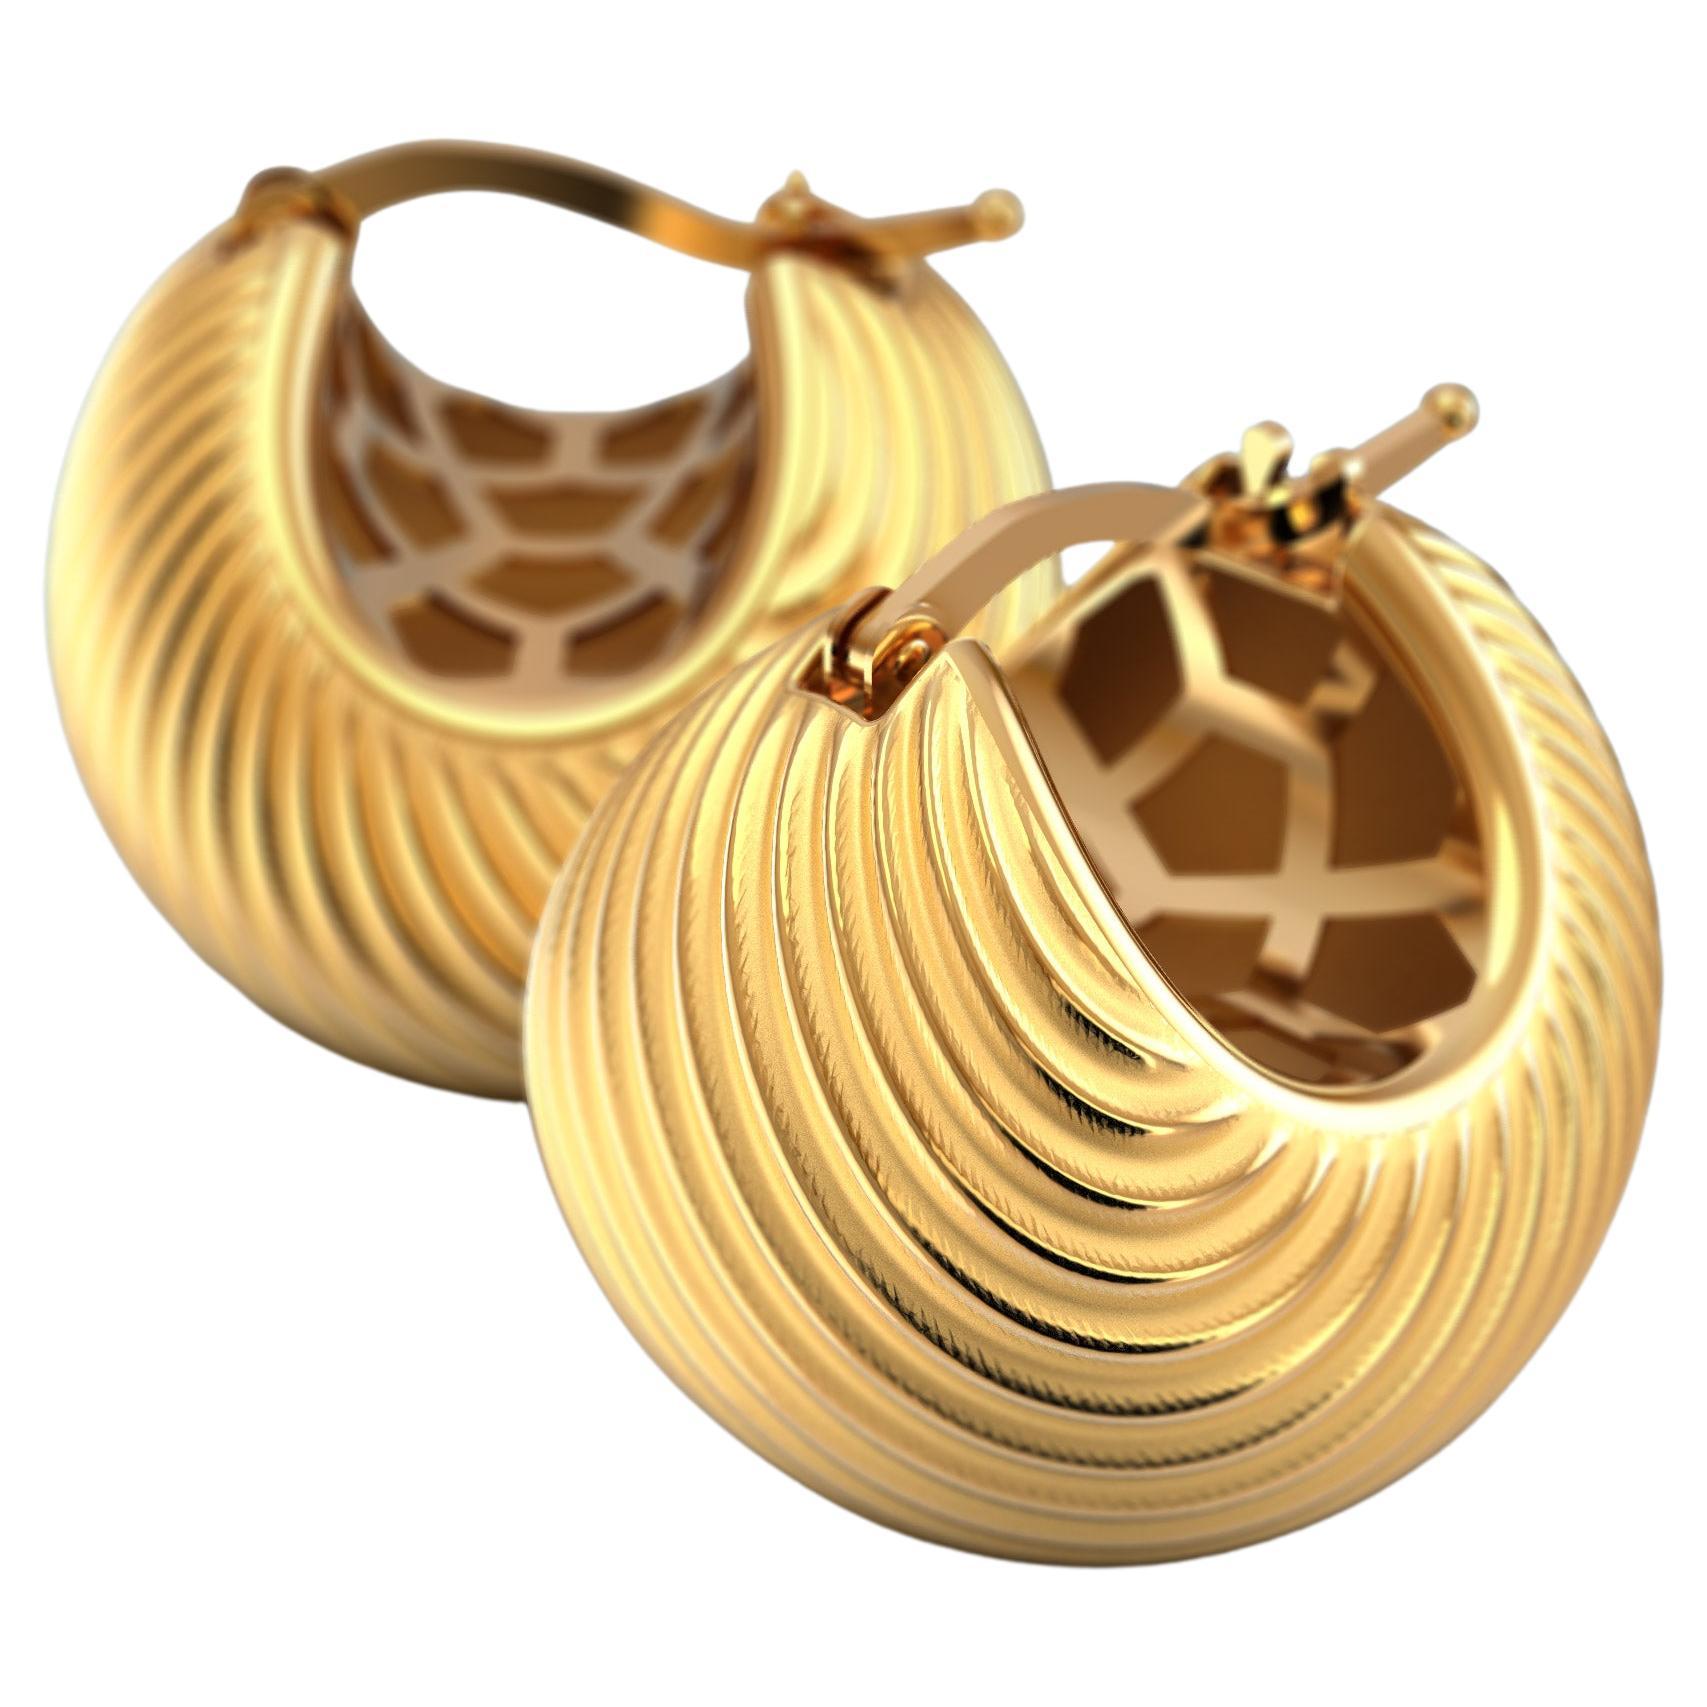 Classic hoop earrings with a ribbed texture, crafted in polished and raw gold 14k 
The hoops are secured by a trusty snap closure.
The approximate total weight is 12 grams in 18k a little less in 14K
Our jewelry is exclusively made to order, can